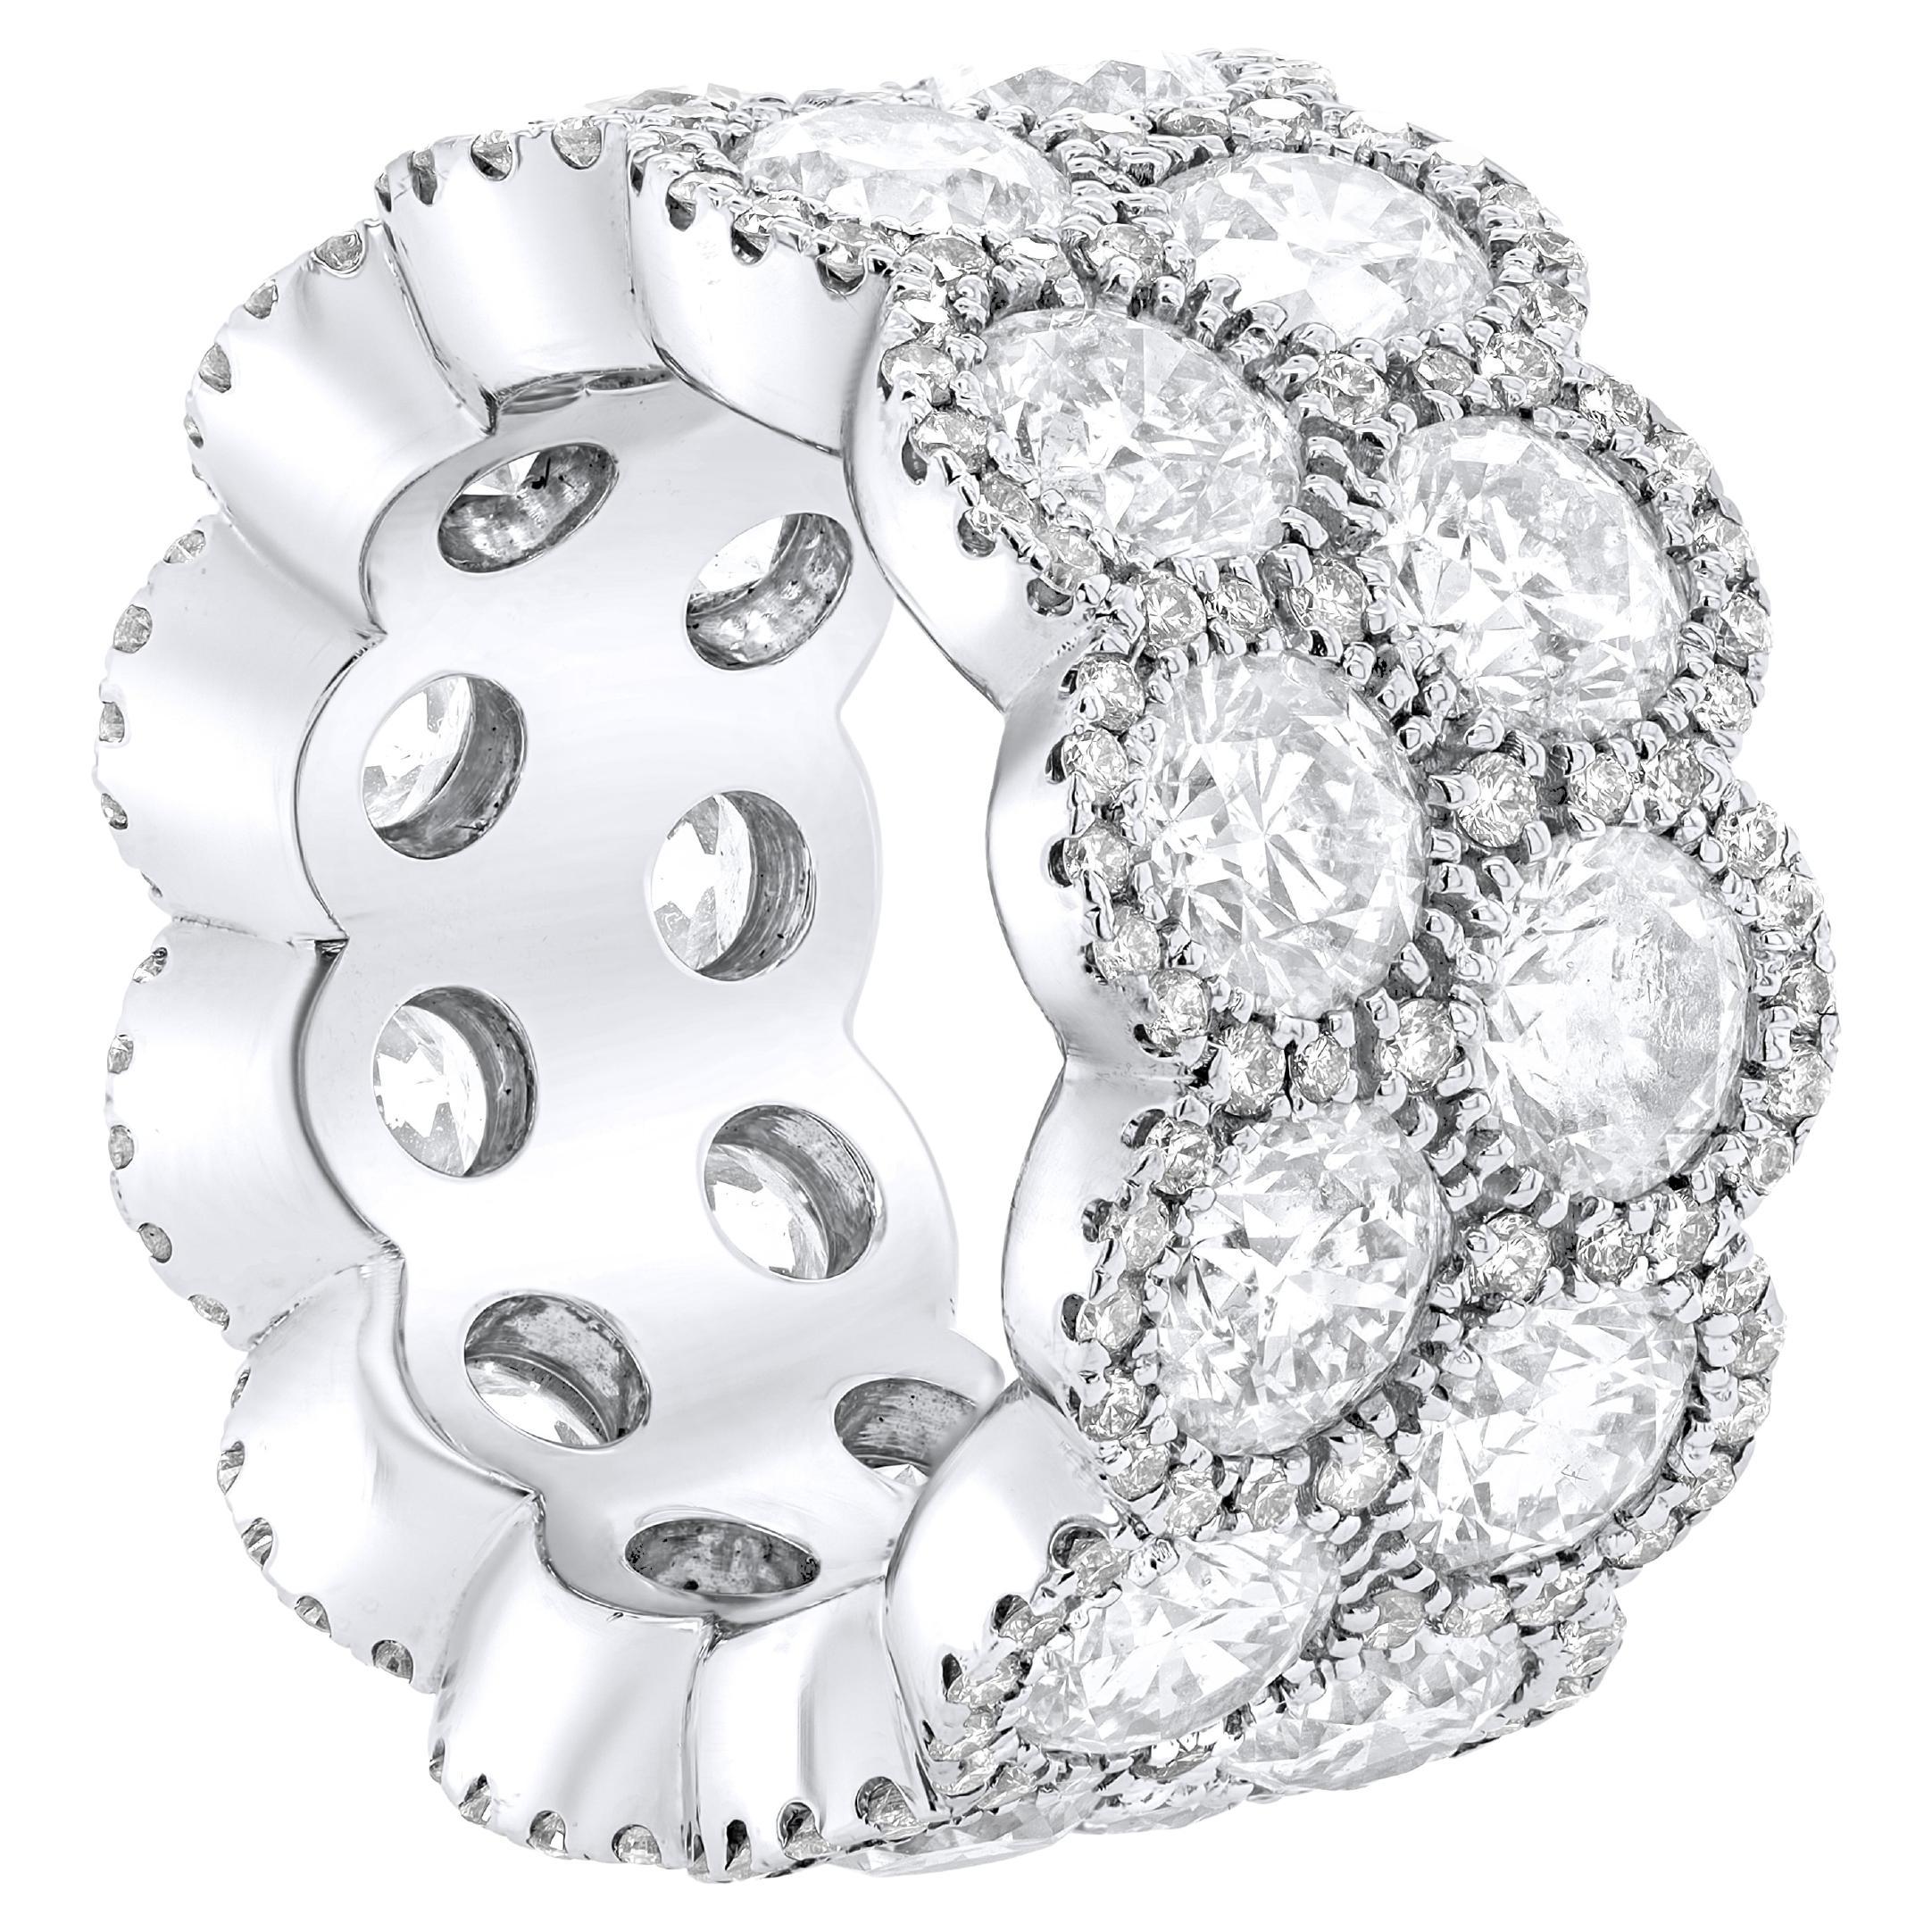 Diana M. platinum eternity band with halo setting features 12.06 ct of 24 round